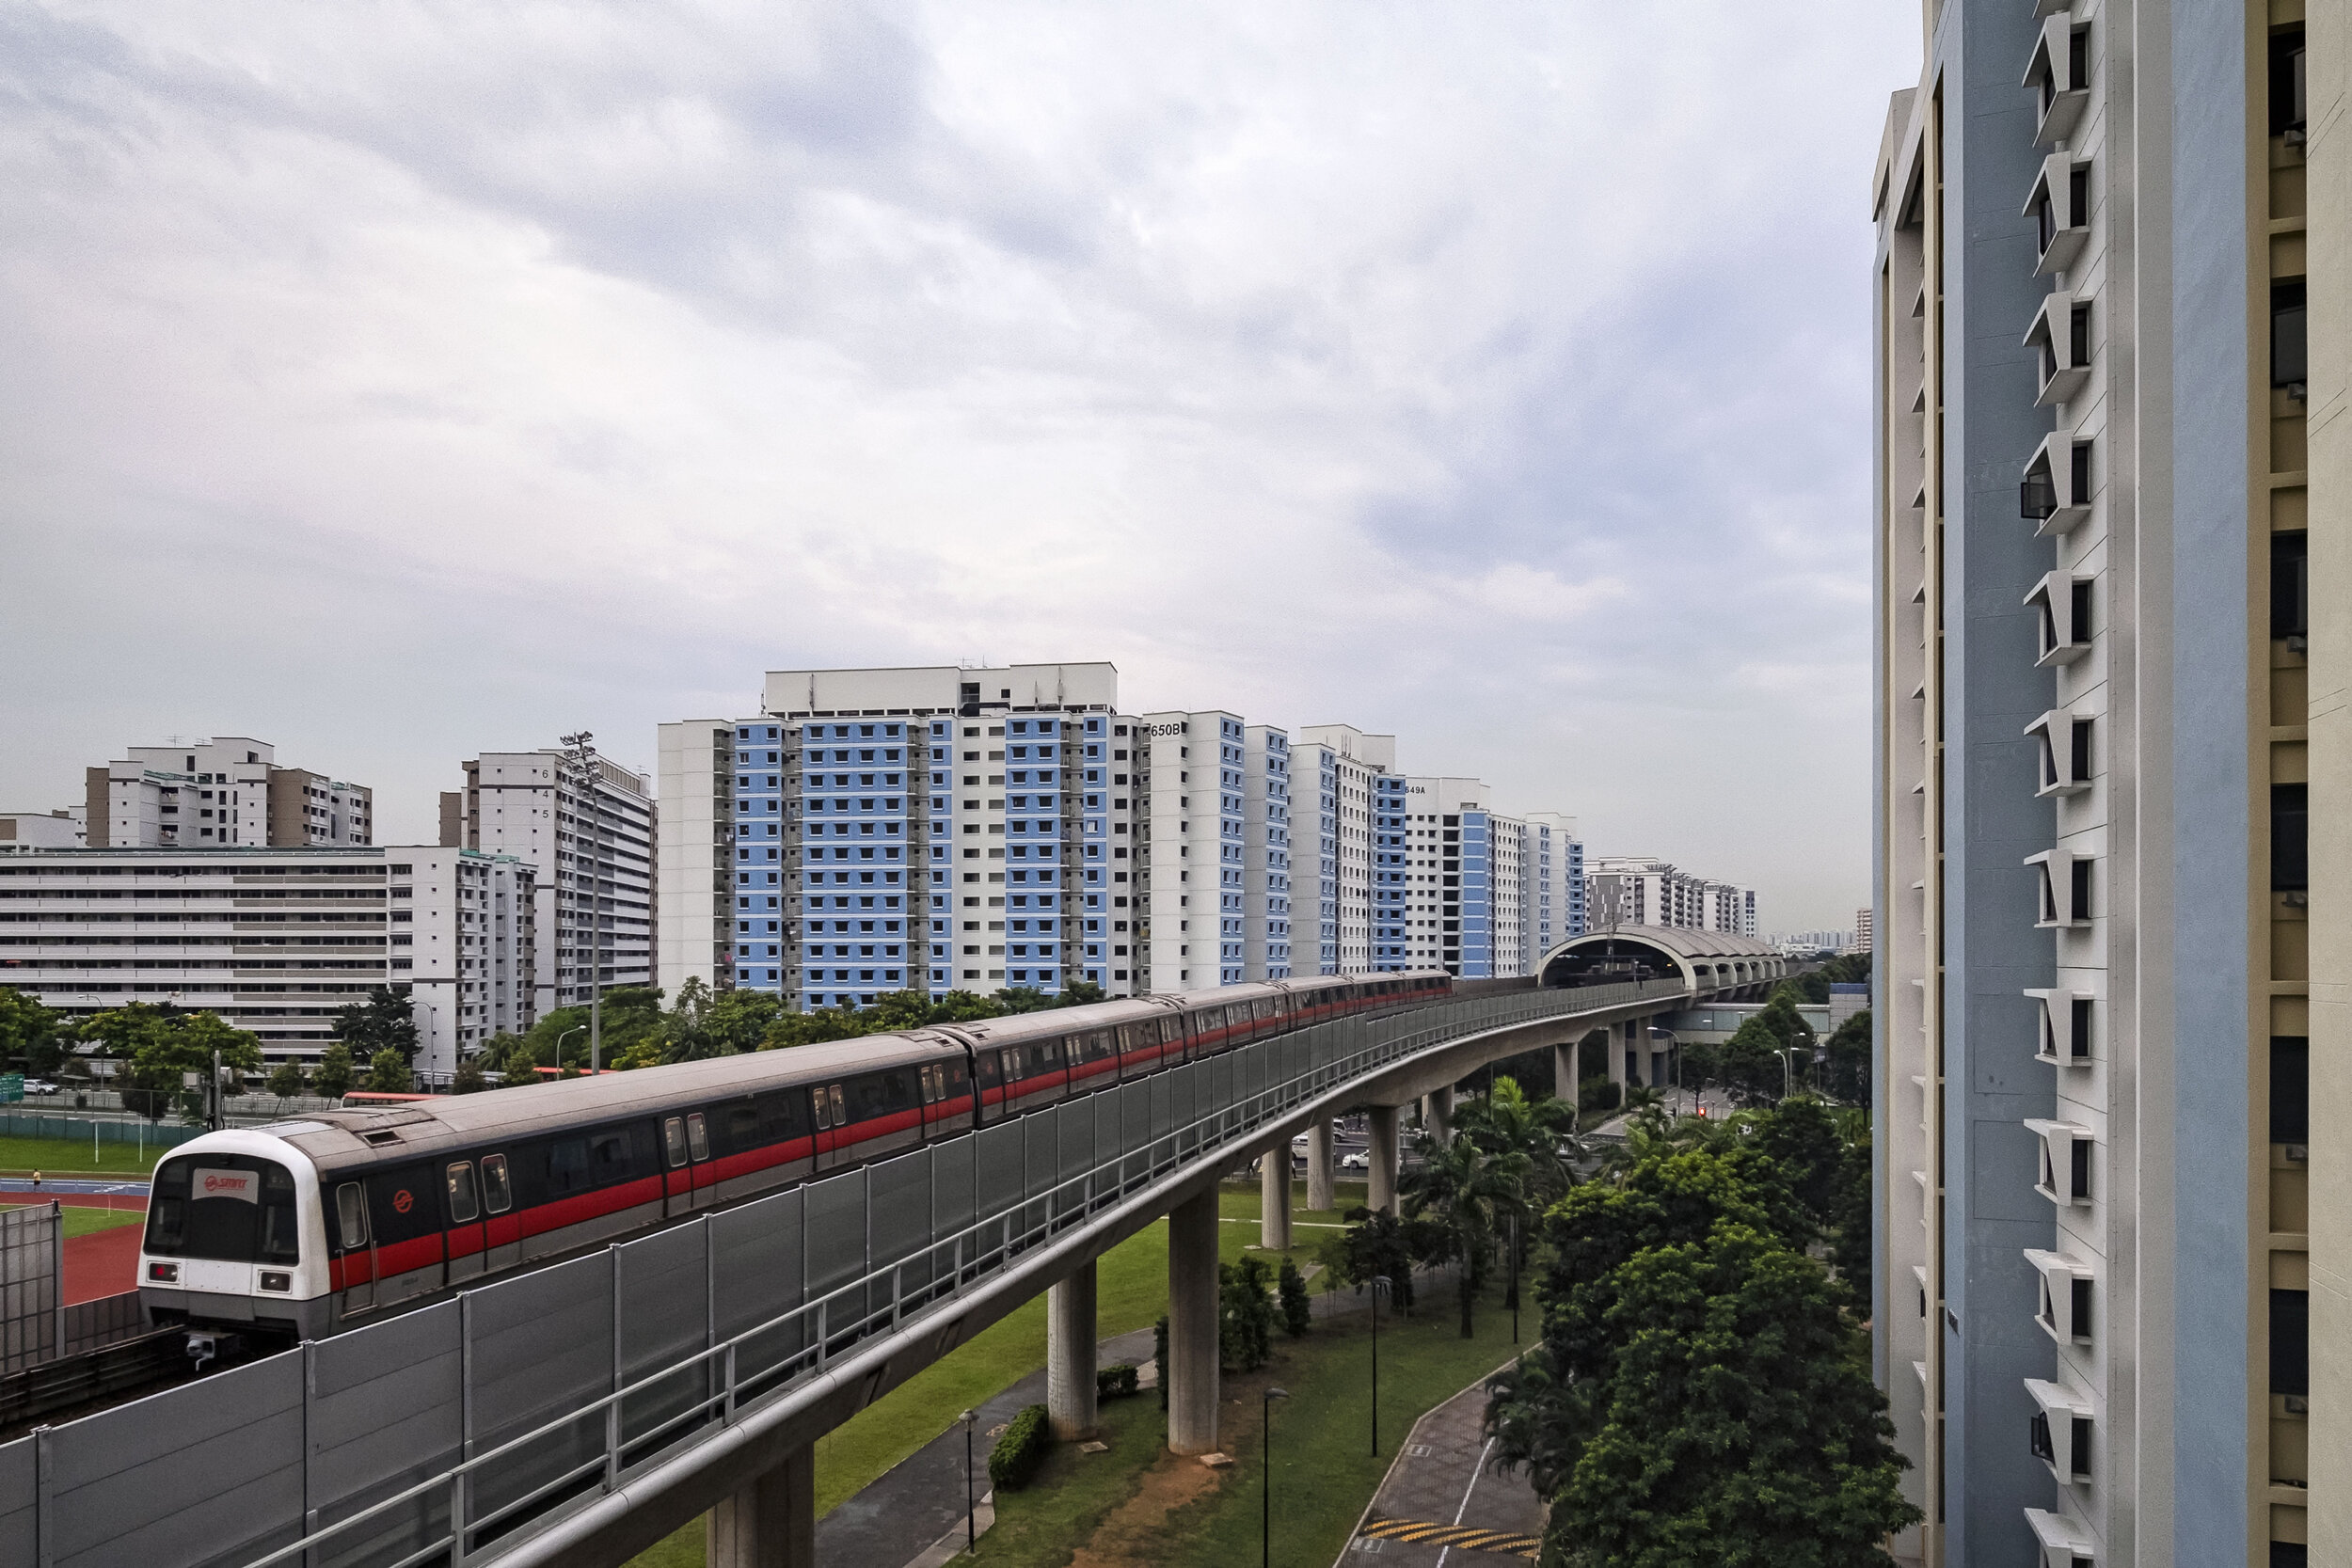  A SMRT train passes by public housing flats as it travels towards Pioneer station in western Singapore 